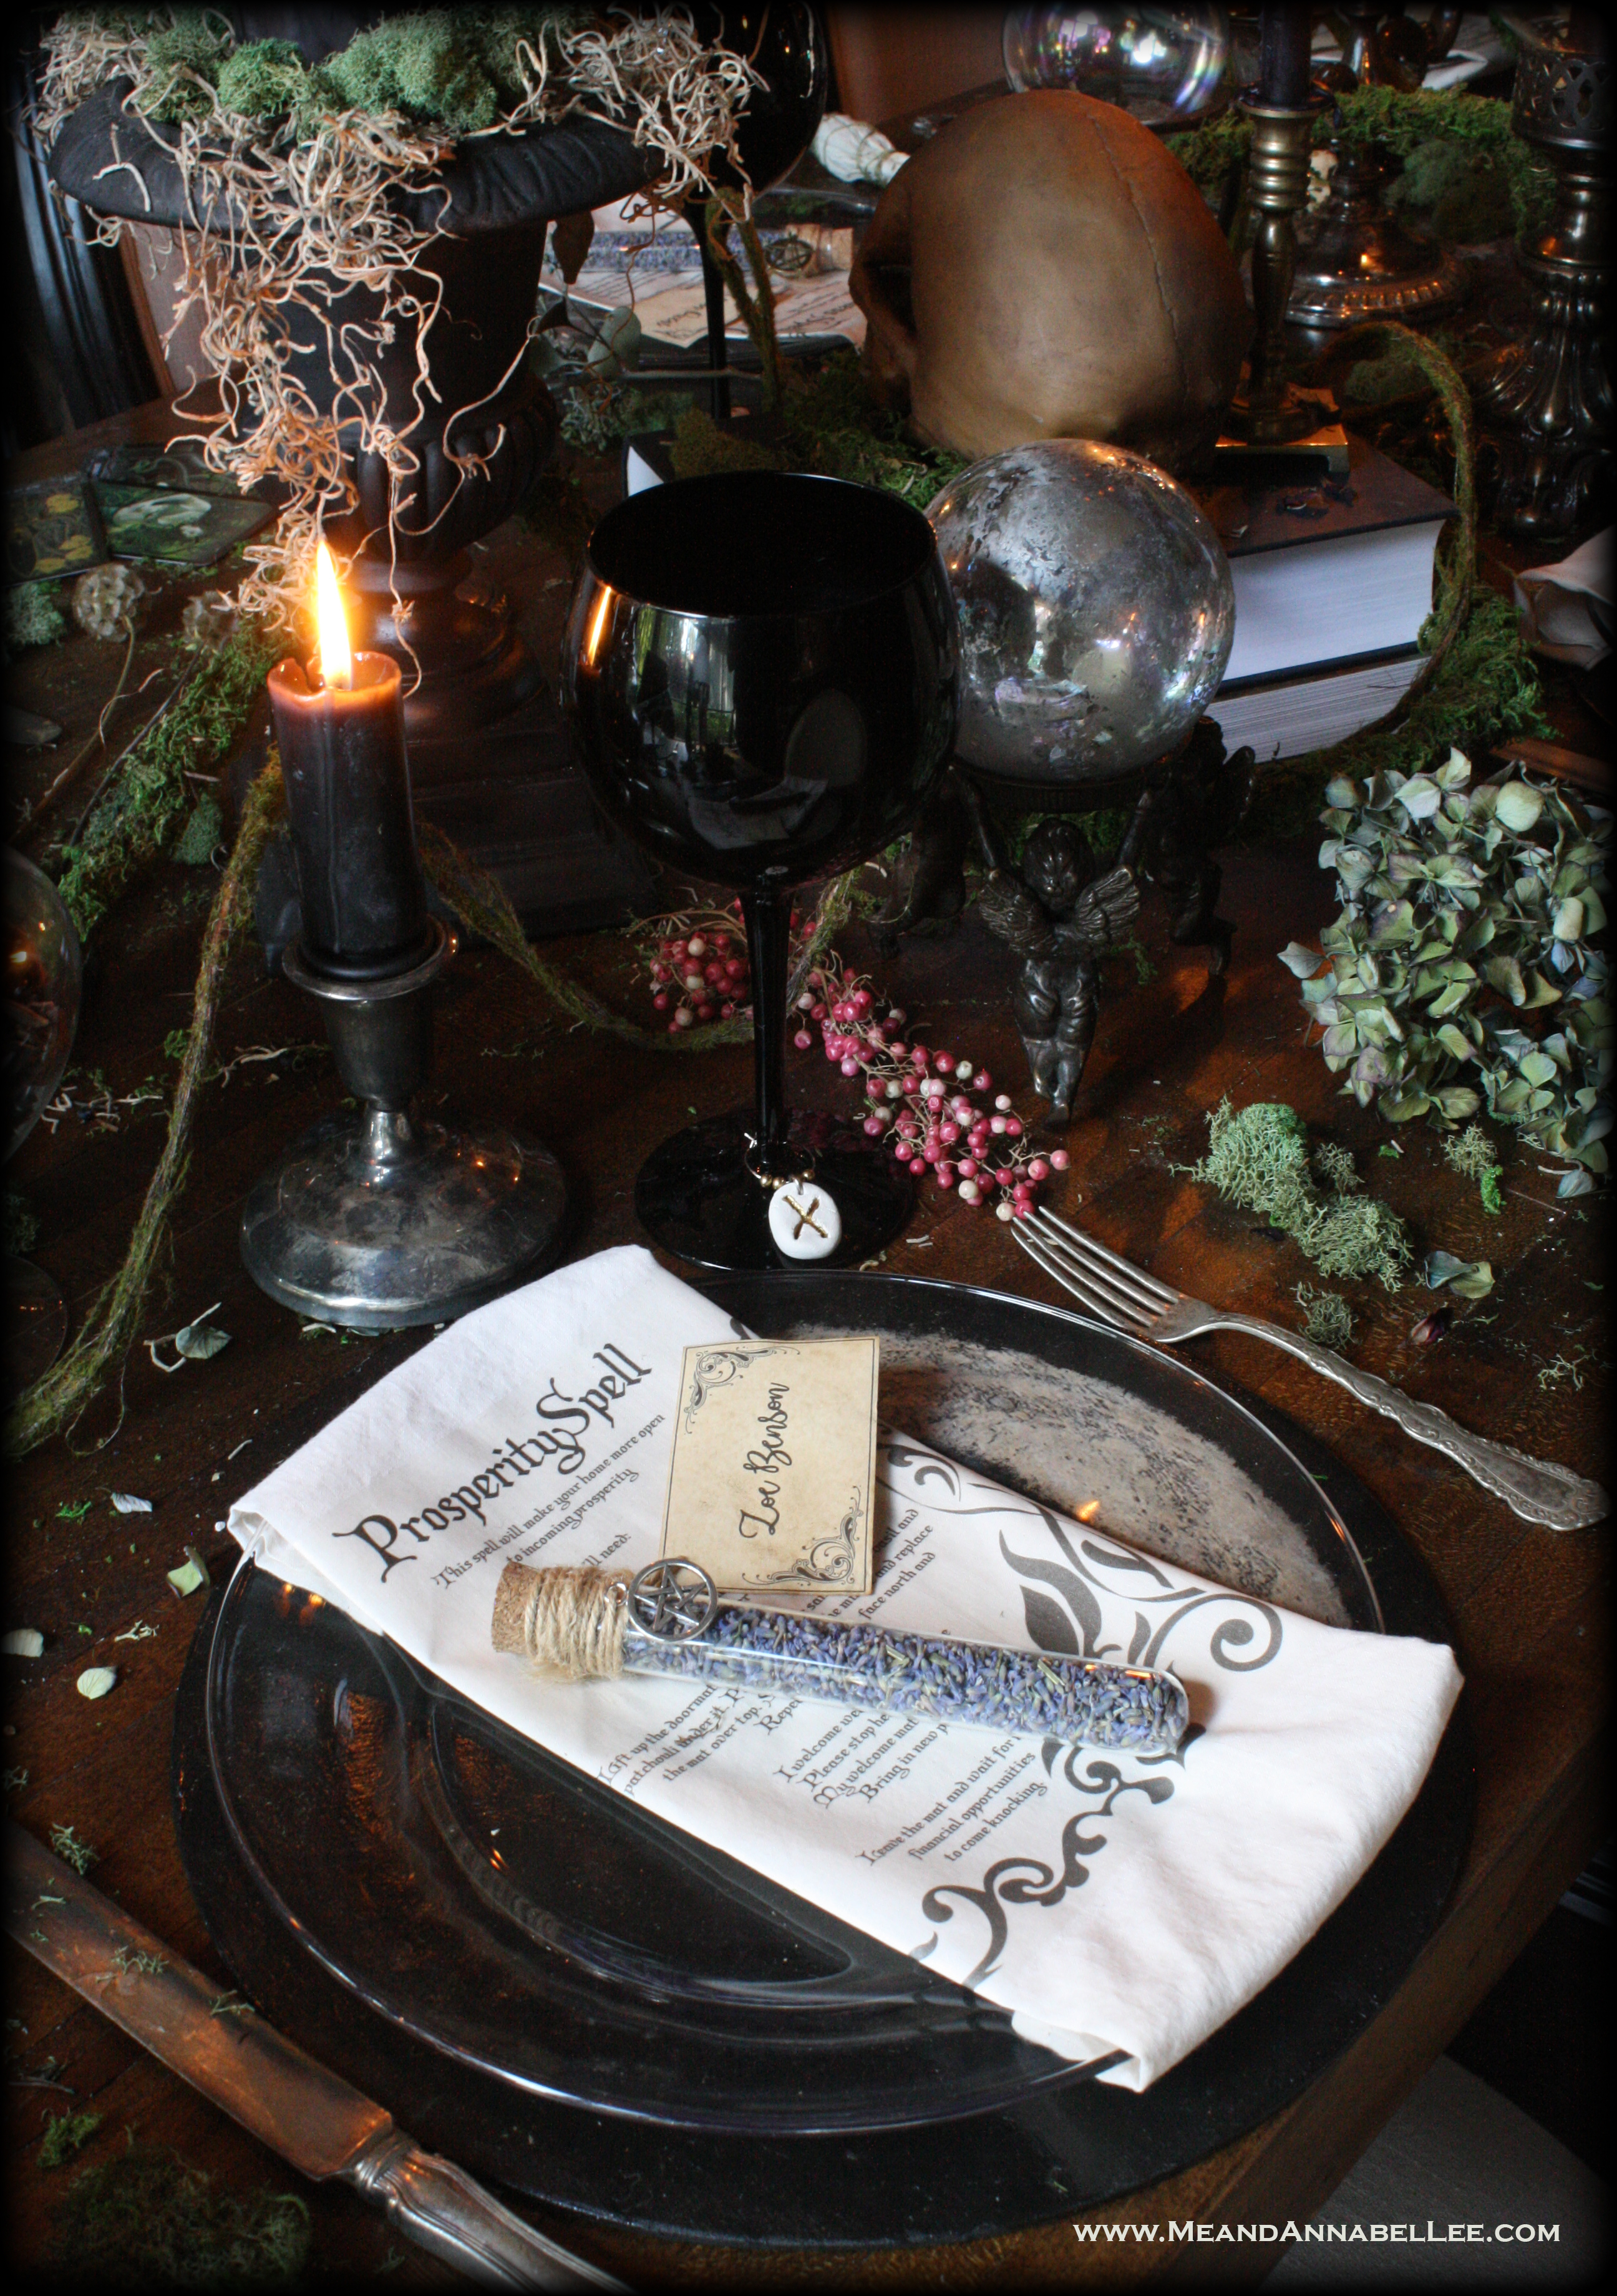 Witches Dinner Party | Dried Floral Stems | Elegant Halloween Table Setting | Mercury Glass Crystal Ball | Moon Phase Charger Plates | DIY Spell Napkins | Herbal Tea Favors and Seating Cards | Rune Stone Wine Charms | www.MeandAnnabelLee.com